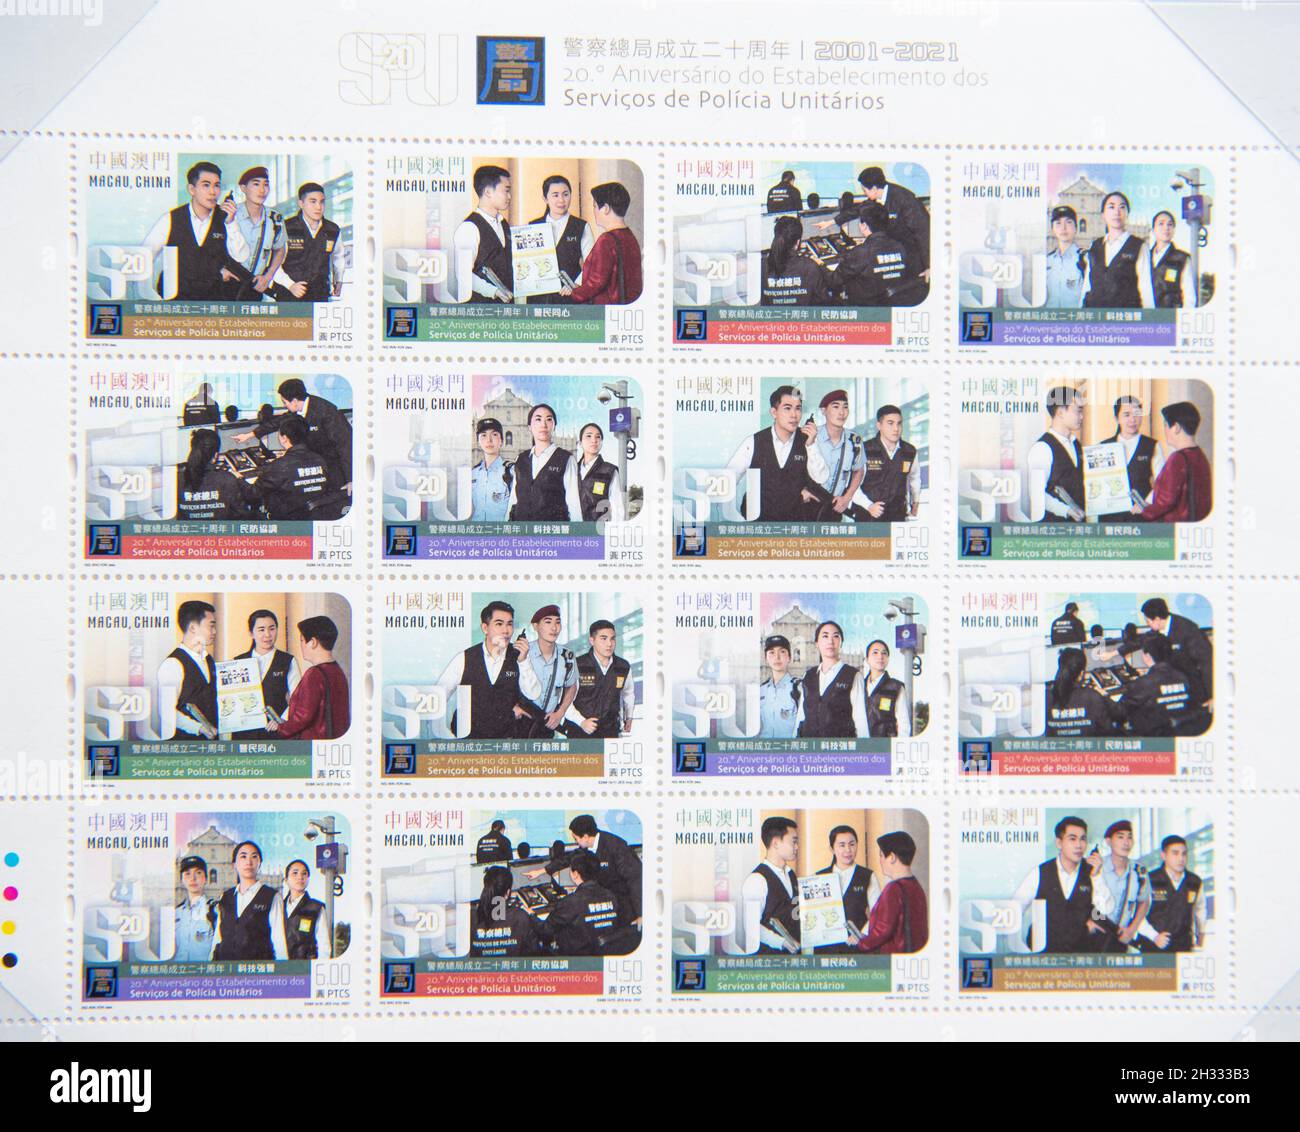 (211025) -- MACAO, Oct. 25, 2021 (Xinhua) -- Photo taken on Oct. 25, 2021 shows the special stamps to mark the 20th anniversary of the Unitary Police Service, in south China's Macao. The Macao Post would issue souvenir stamps to mark the 150th anniversary of the Kiang Wu Hospital Charitable Association on Oct. 28, the 20th anniversary of the Unitary Police Service on Oct. 29 and the 20th anniversary of Macao Customs Service on Nov. 1. (Xinhua/Cheong Kam Ka) Stock Photo